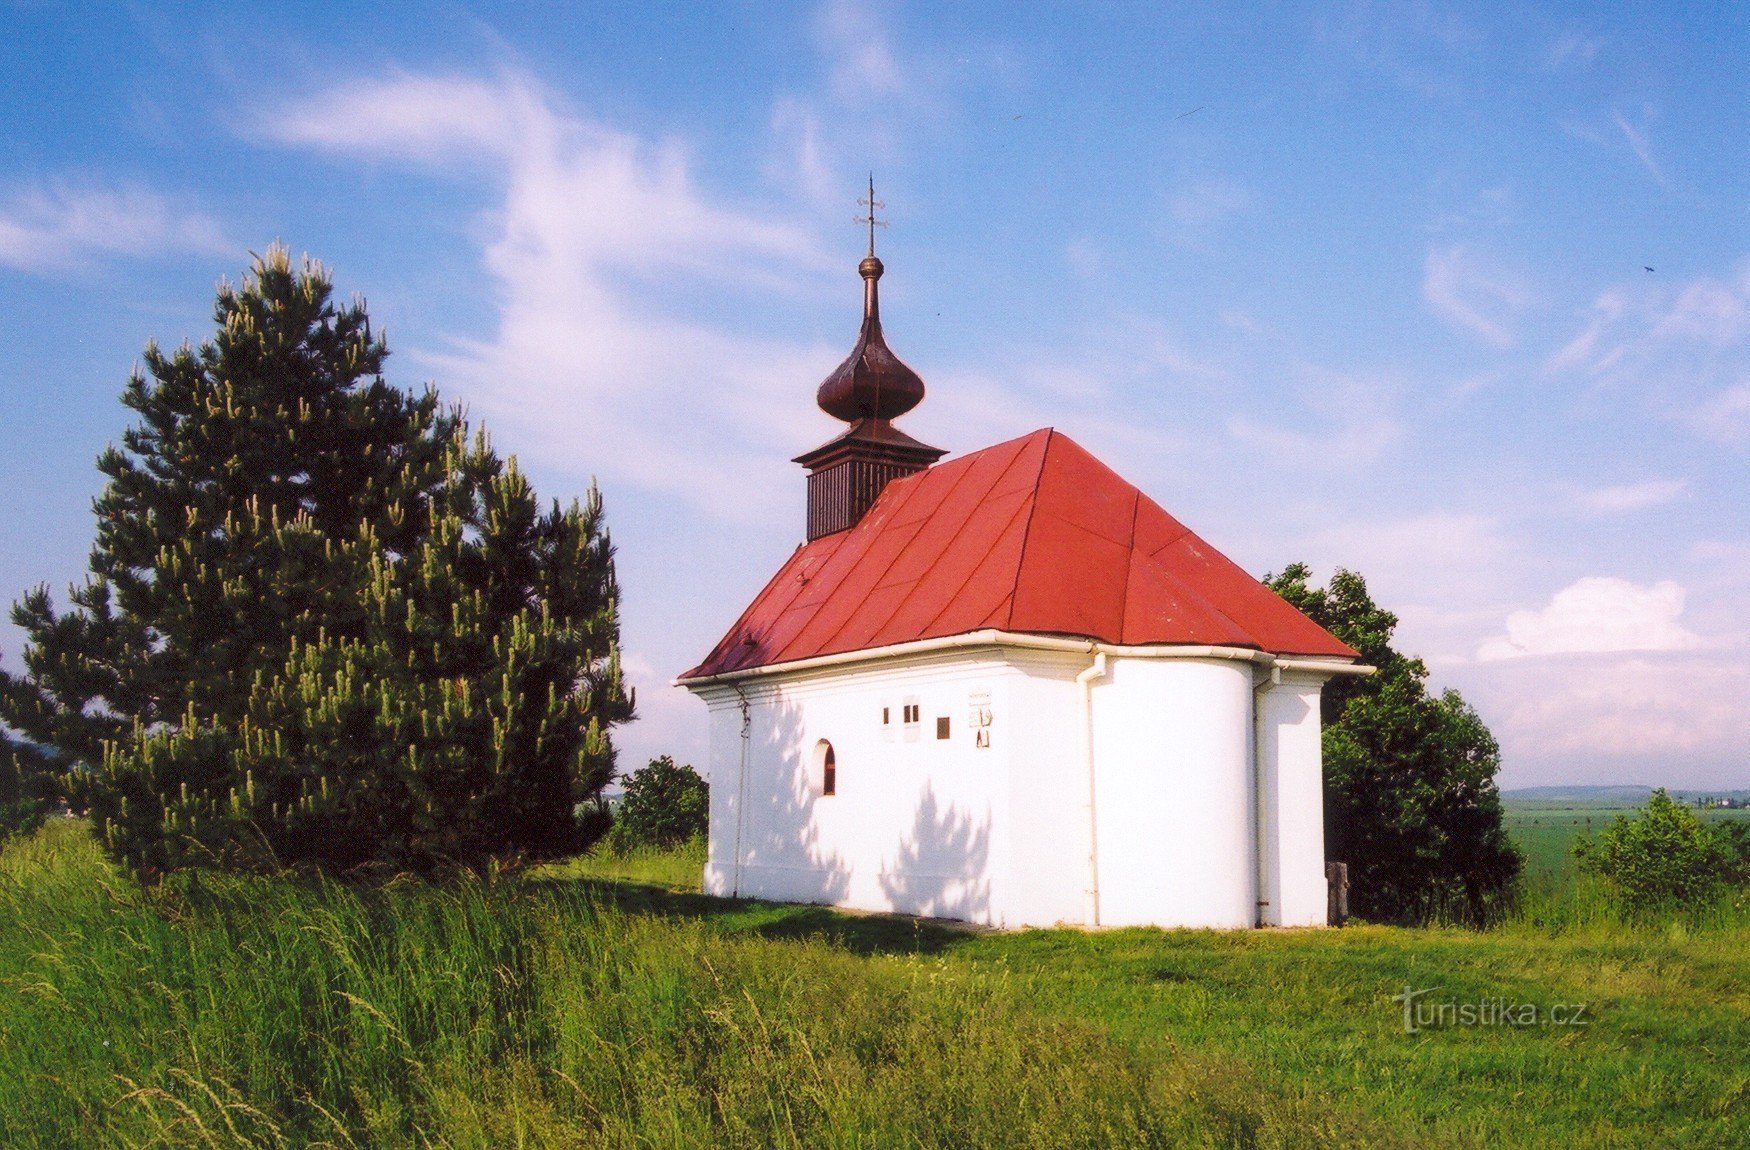 The chapel on top of the hill